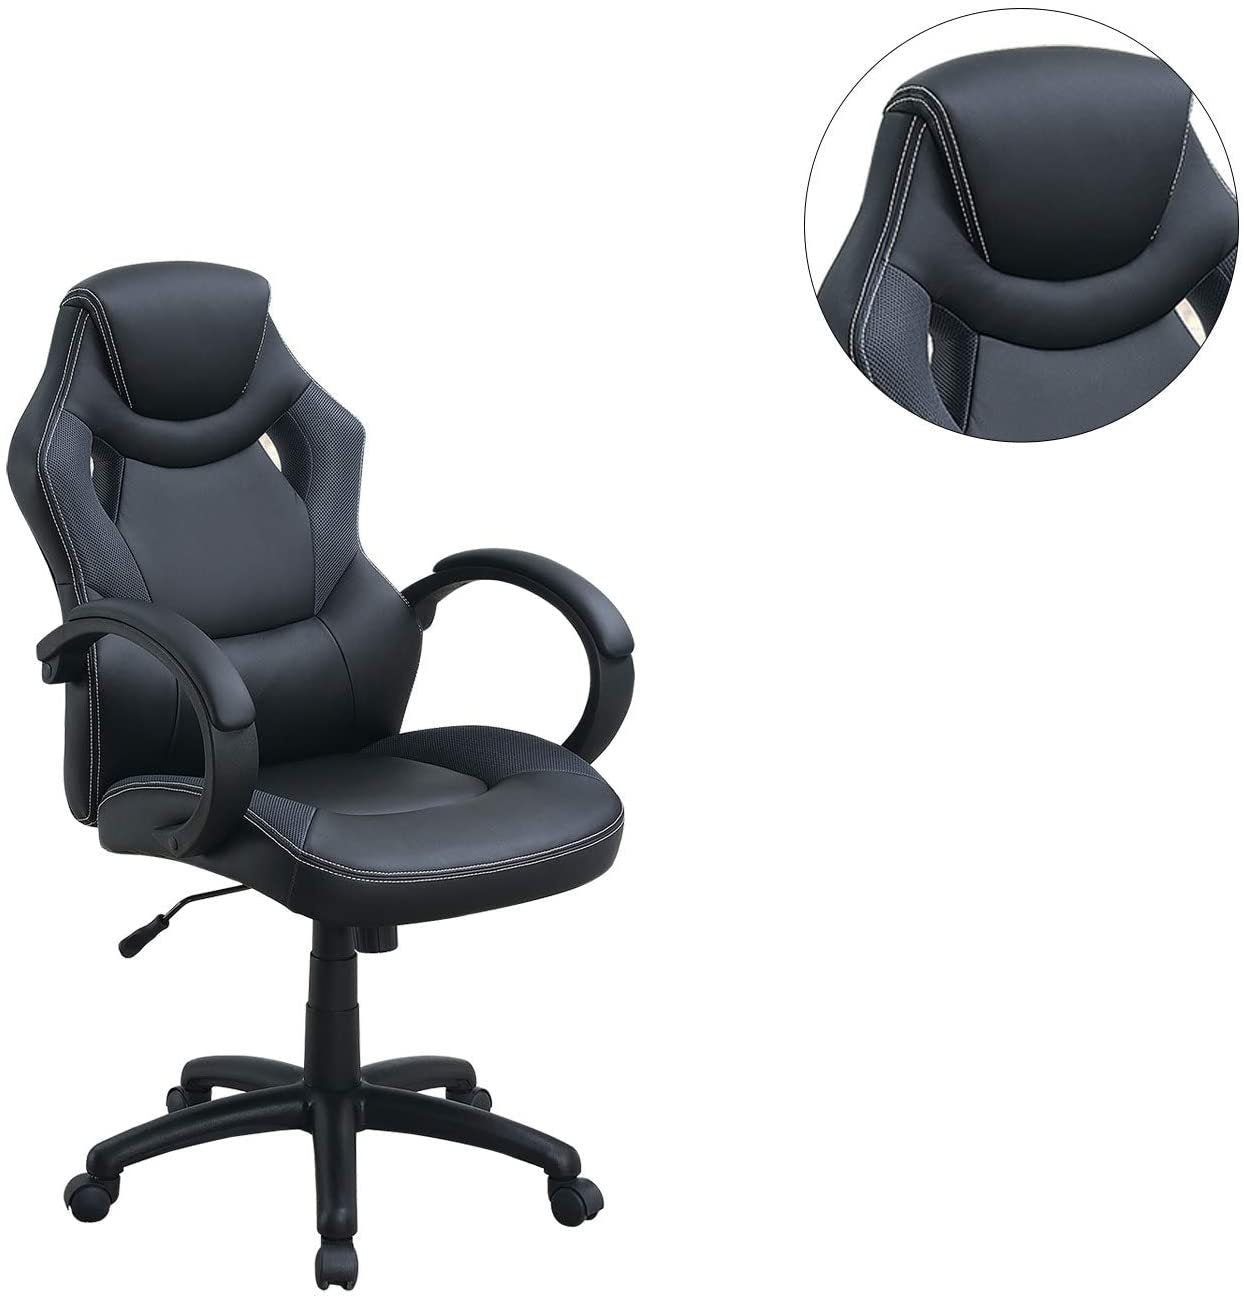 Office Chair Upholstered 1pc Cushioned Comfort Chair Relax Gaming Office Work (Black)